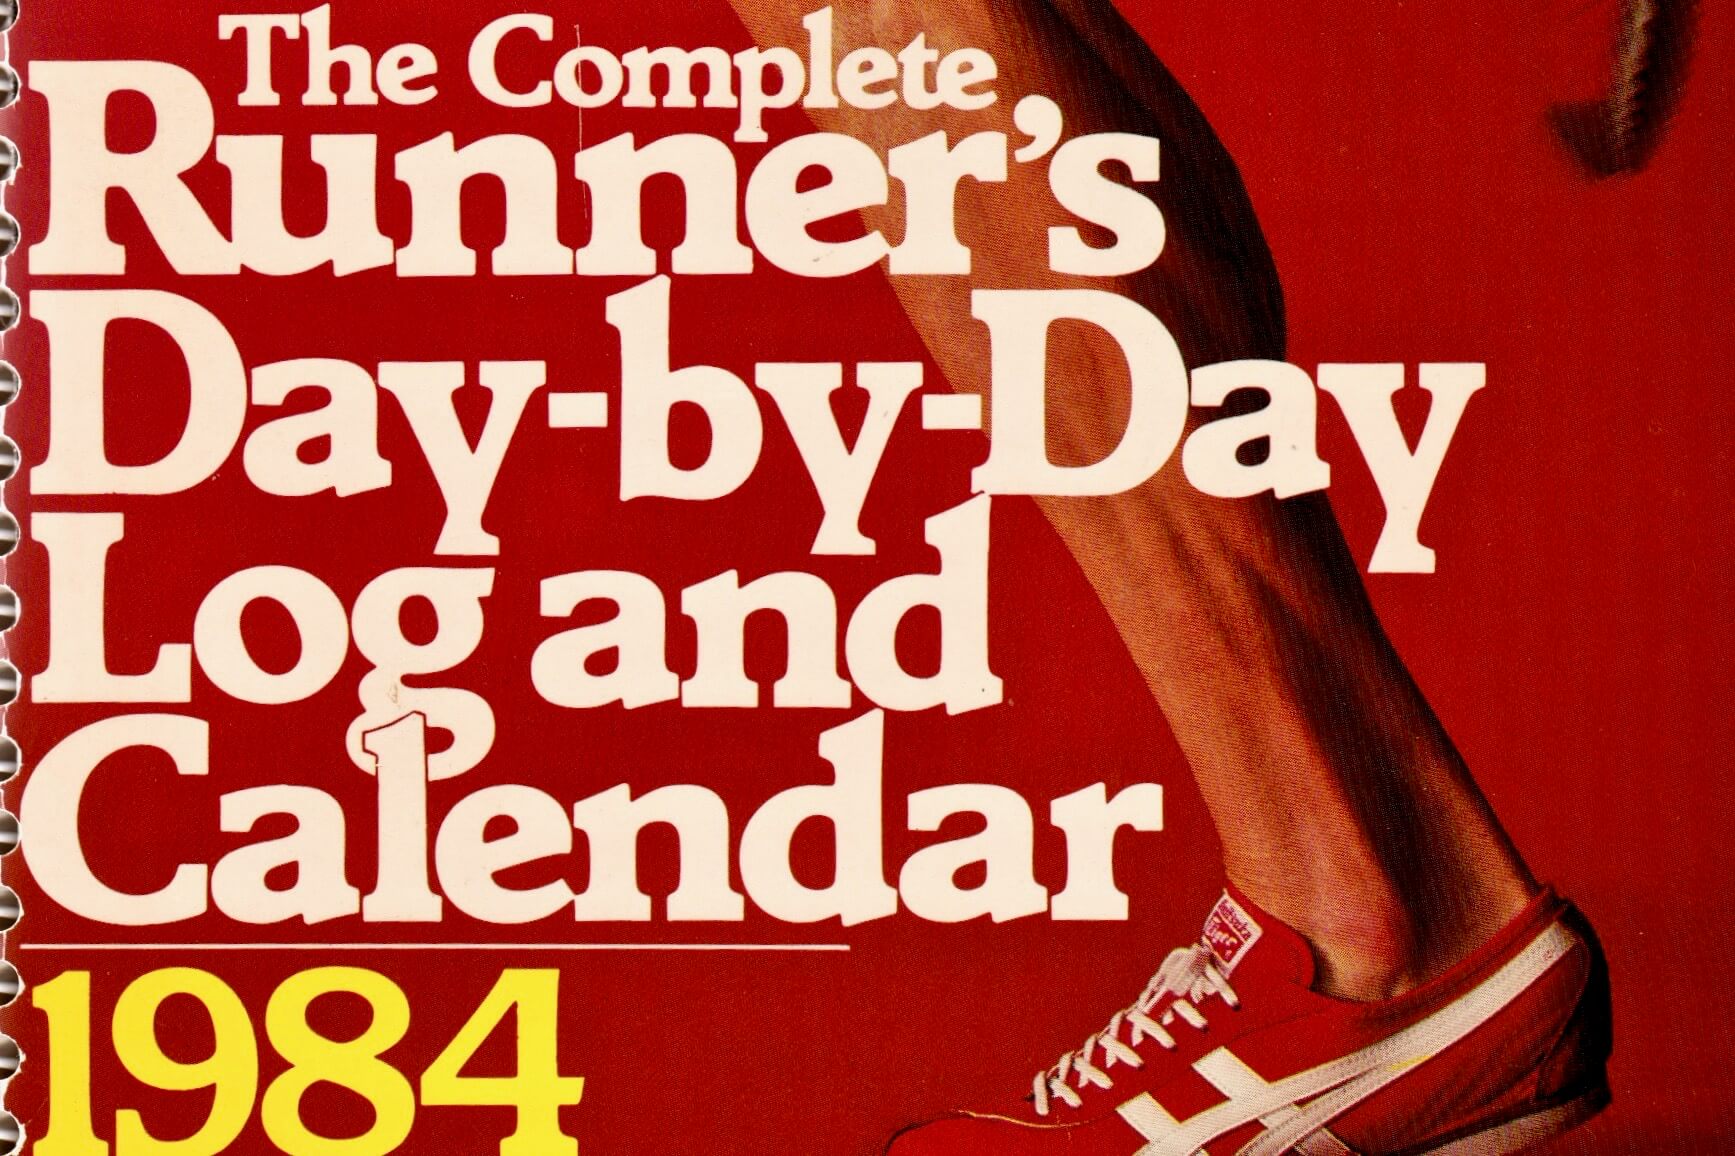 The Complete Runners Day by Day Log and Calendar 1984